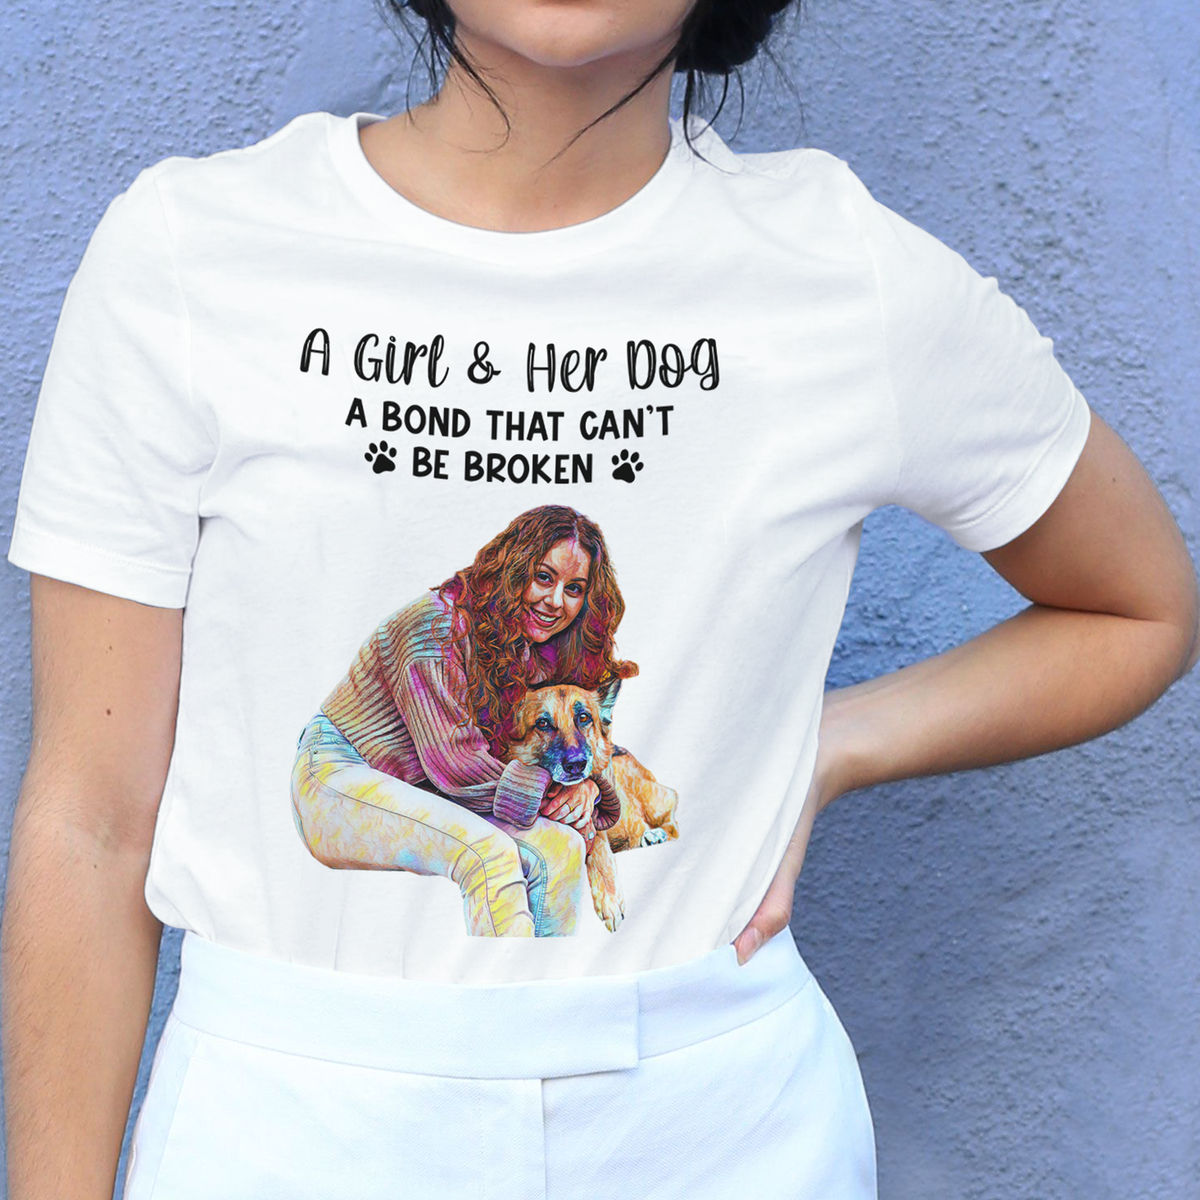 Photo T-shirt - Photo Shirt - A Girl And Her Dog A Bond That Can't Be Broken - Personalized Photo Shirt_1